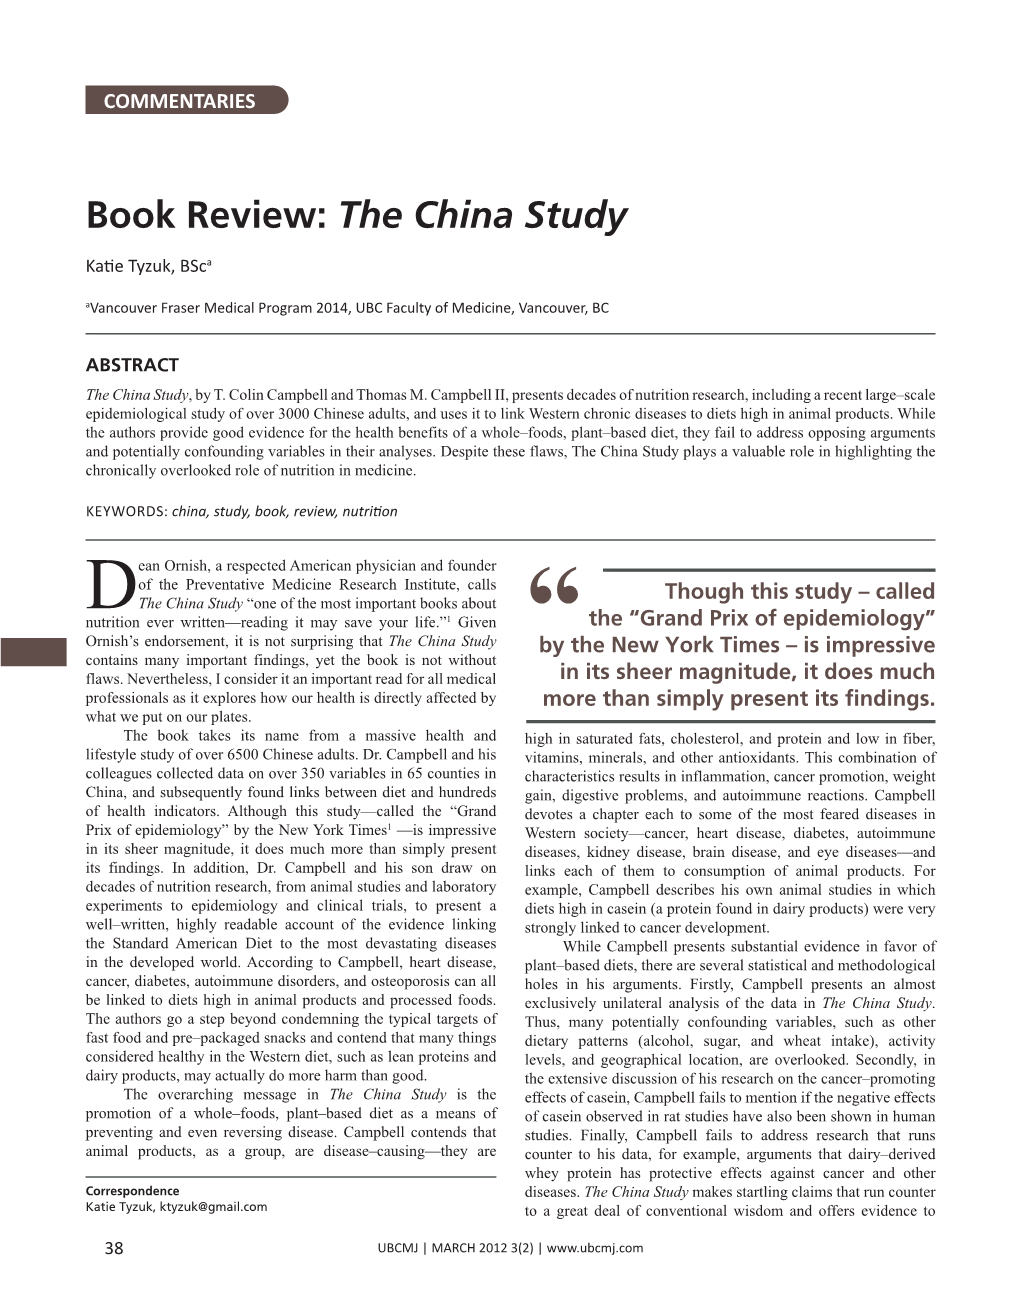 Book Review: the China Study